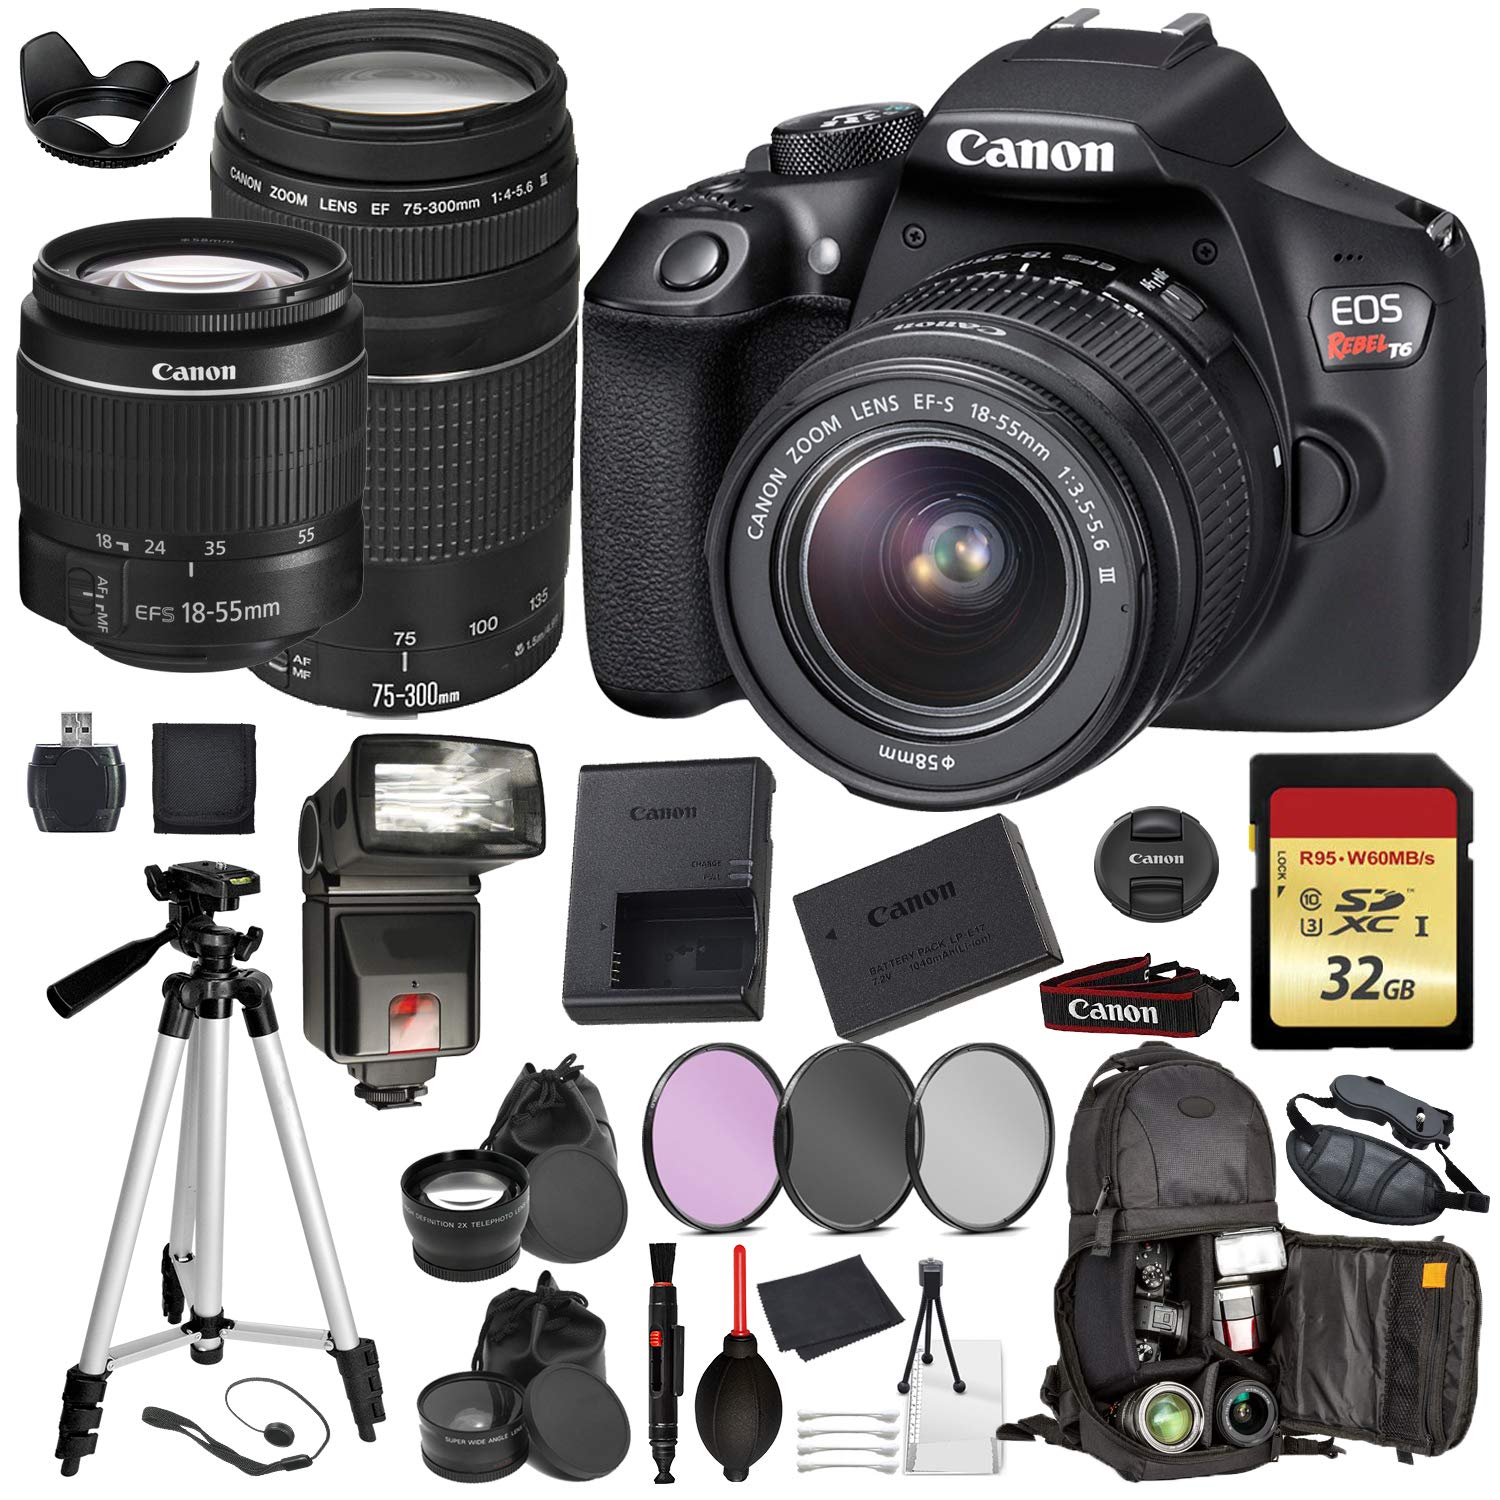 Canon EOS Rebel T6 Digital SLR Camera with EF-S 18-55mm + EF 75-300mm (Black) Professional Accessory Bundle Package Deal